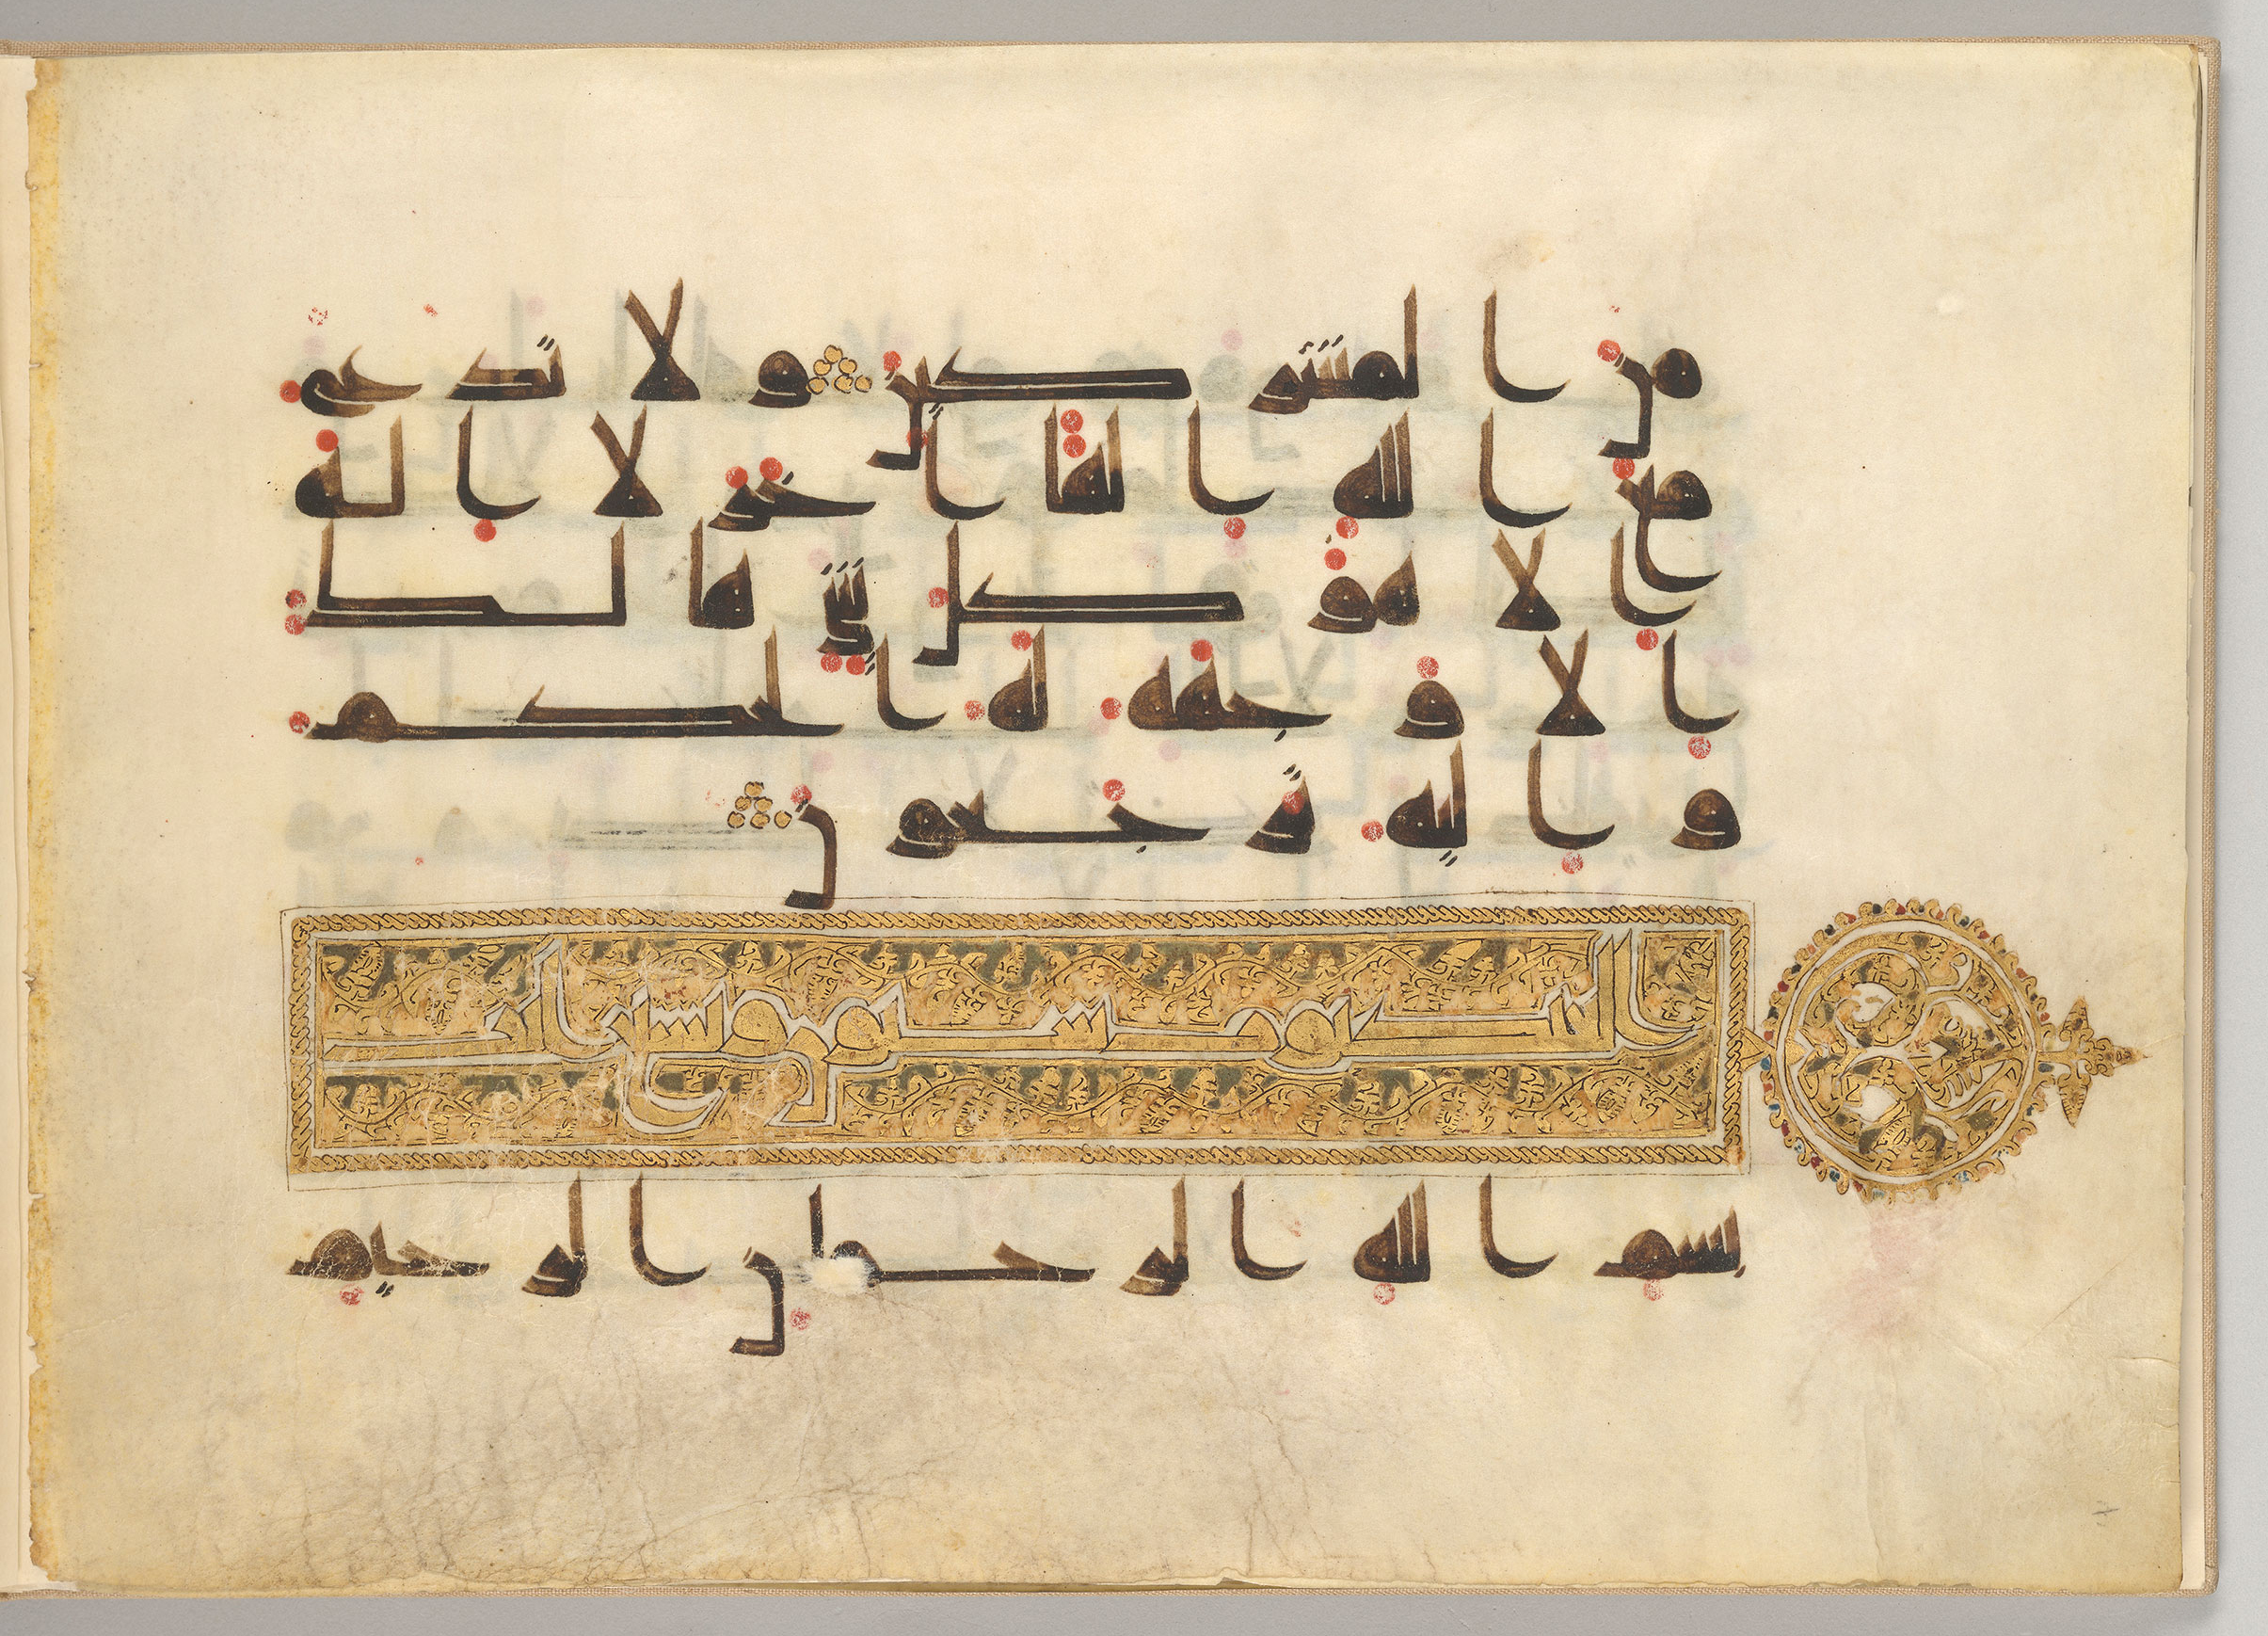 Smarthistory – Folio from a Qur'an